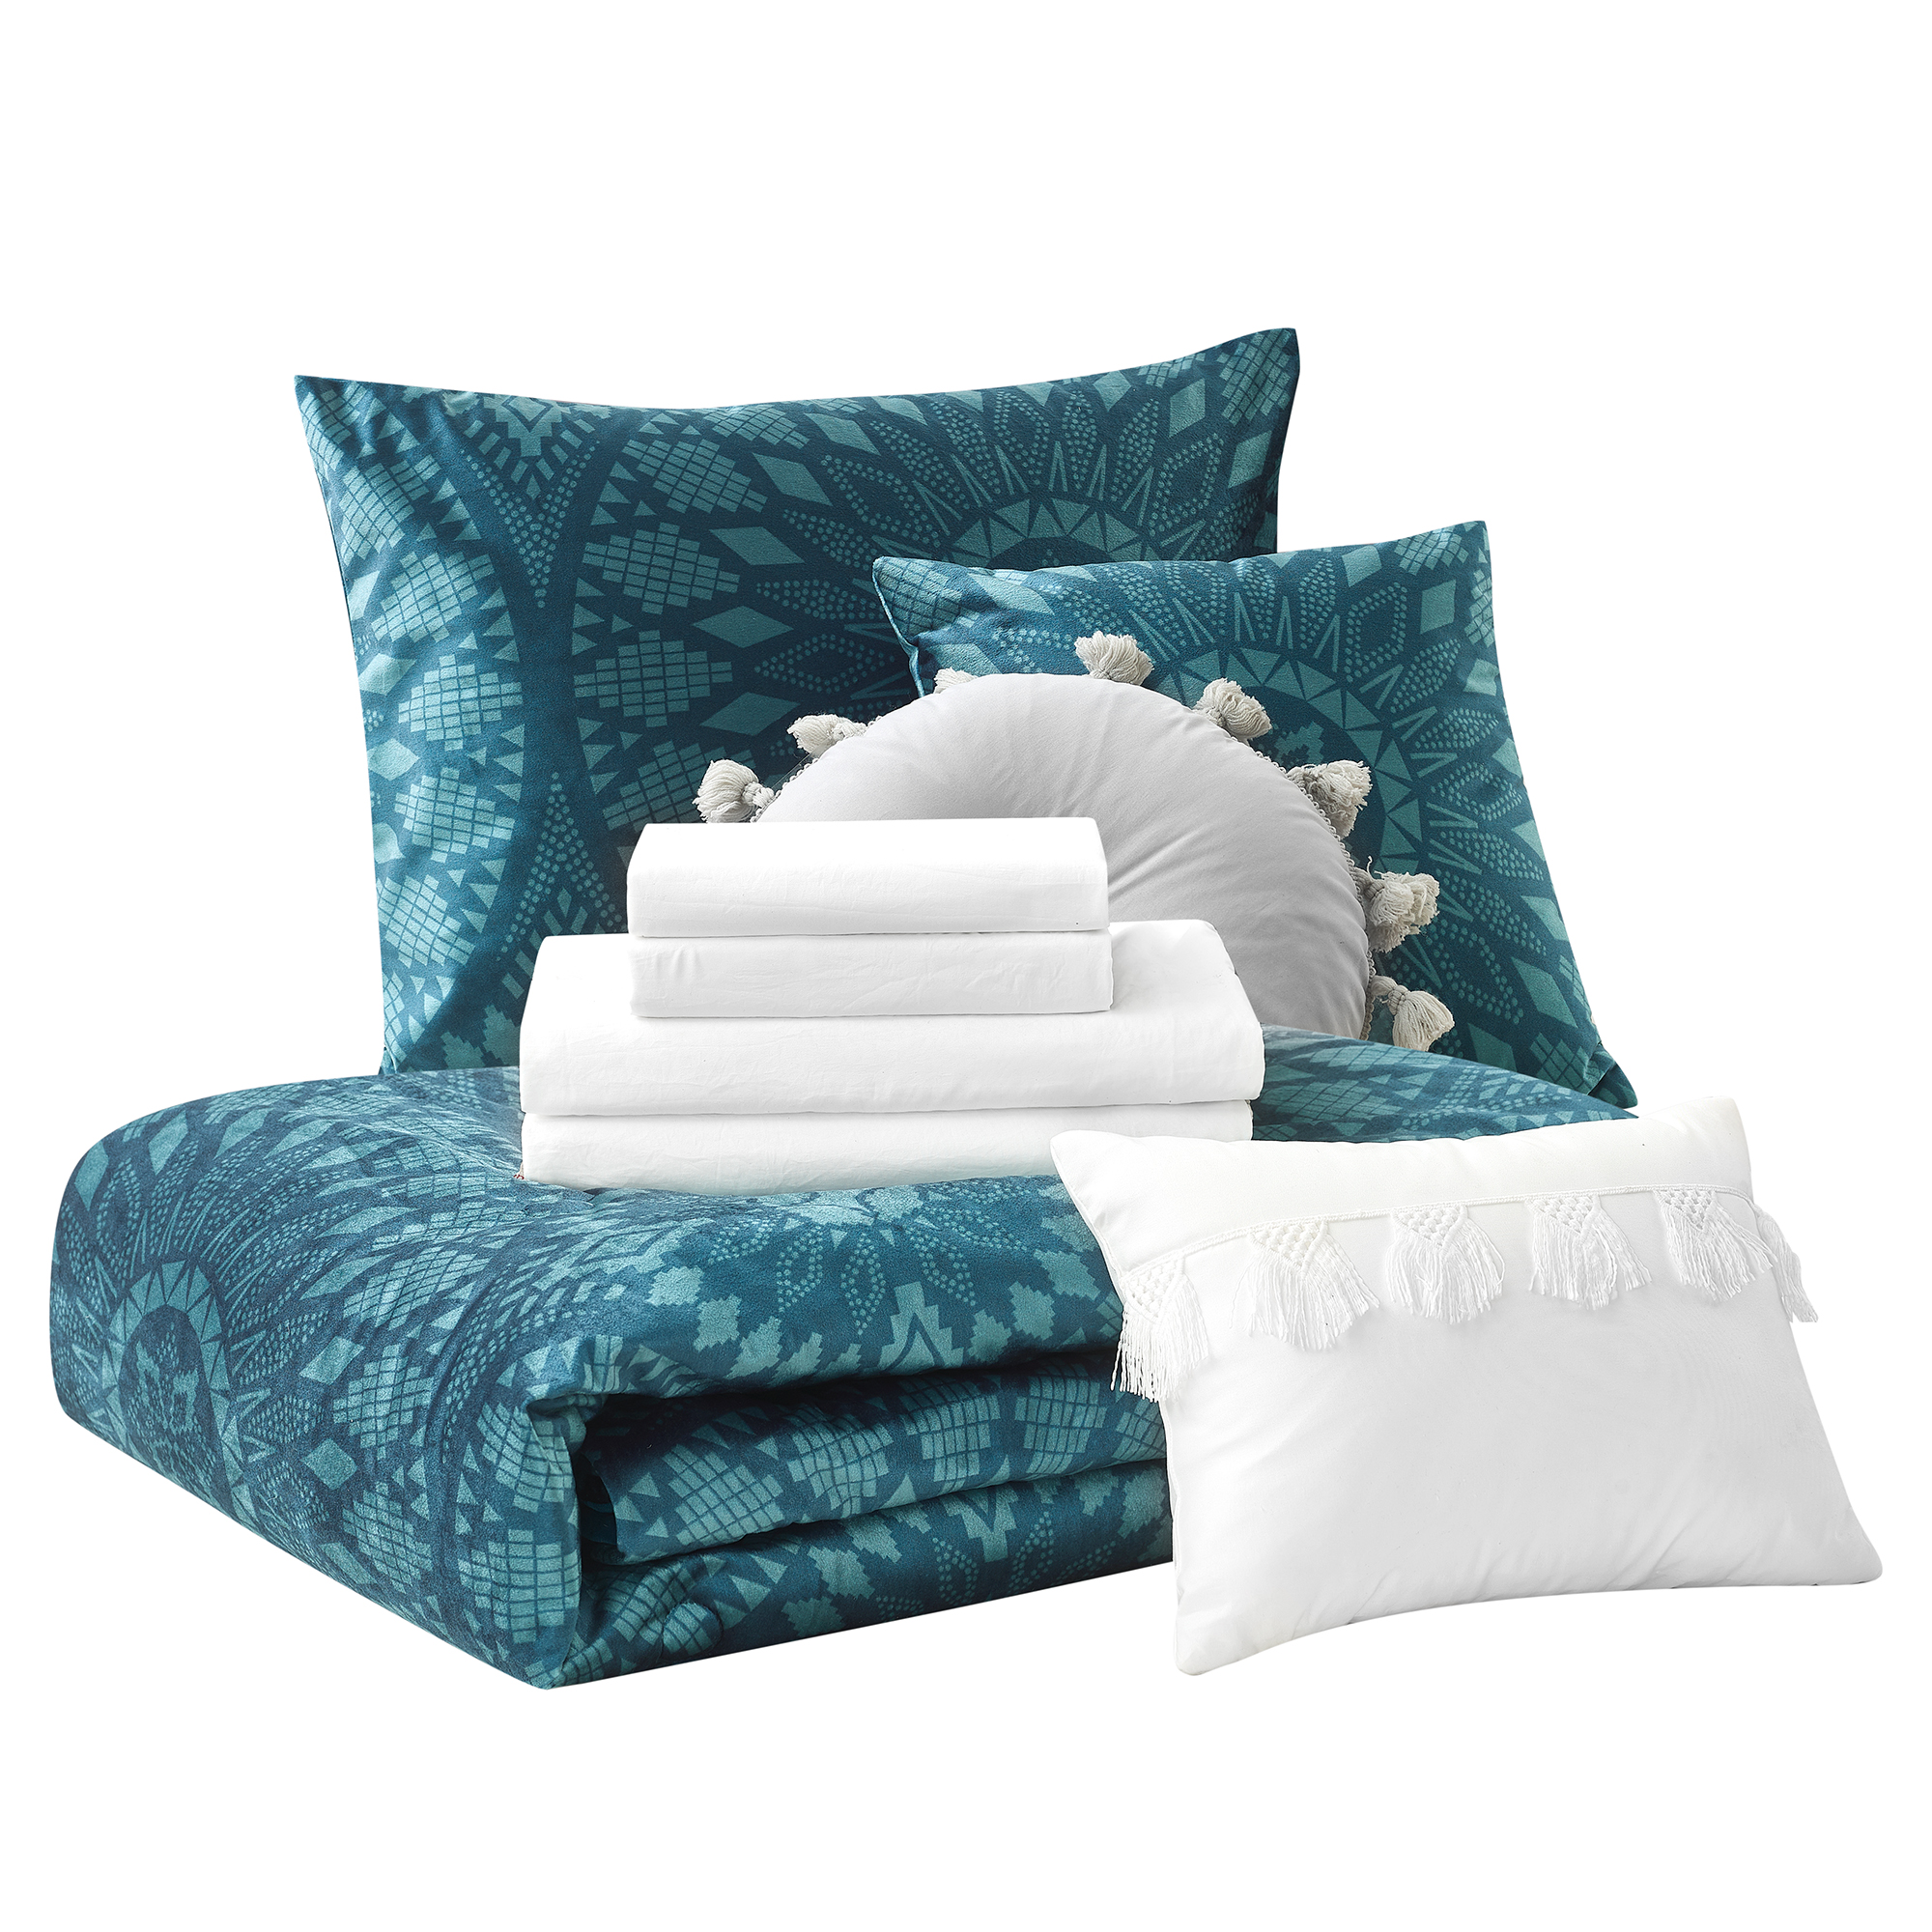 Mainstays Teal Velvet Medallion 10 Piece Bed in a Bag with Sheets and 3 DecPillows, Full - image 5 of 12